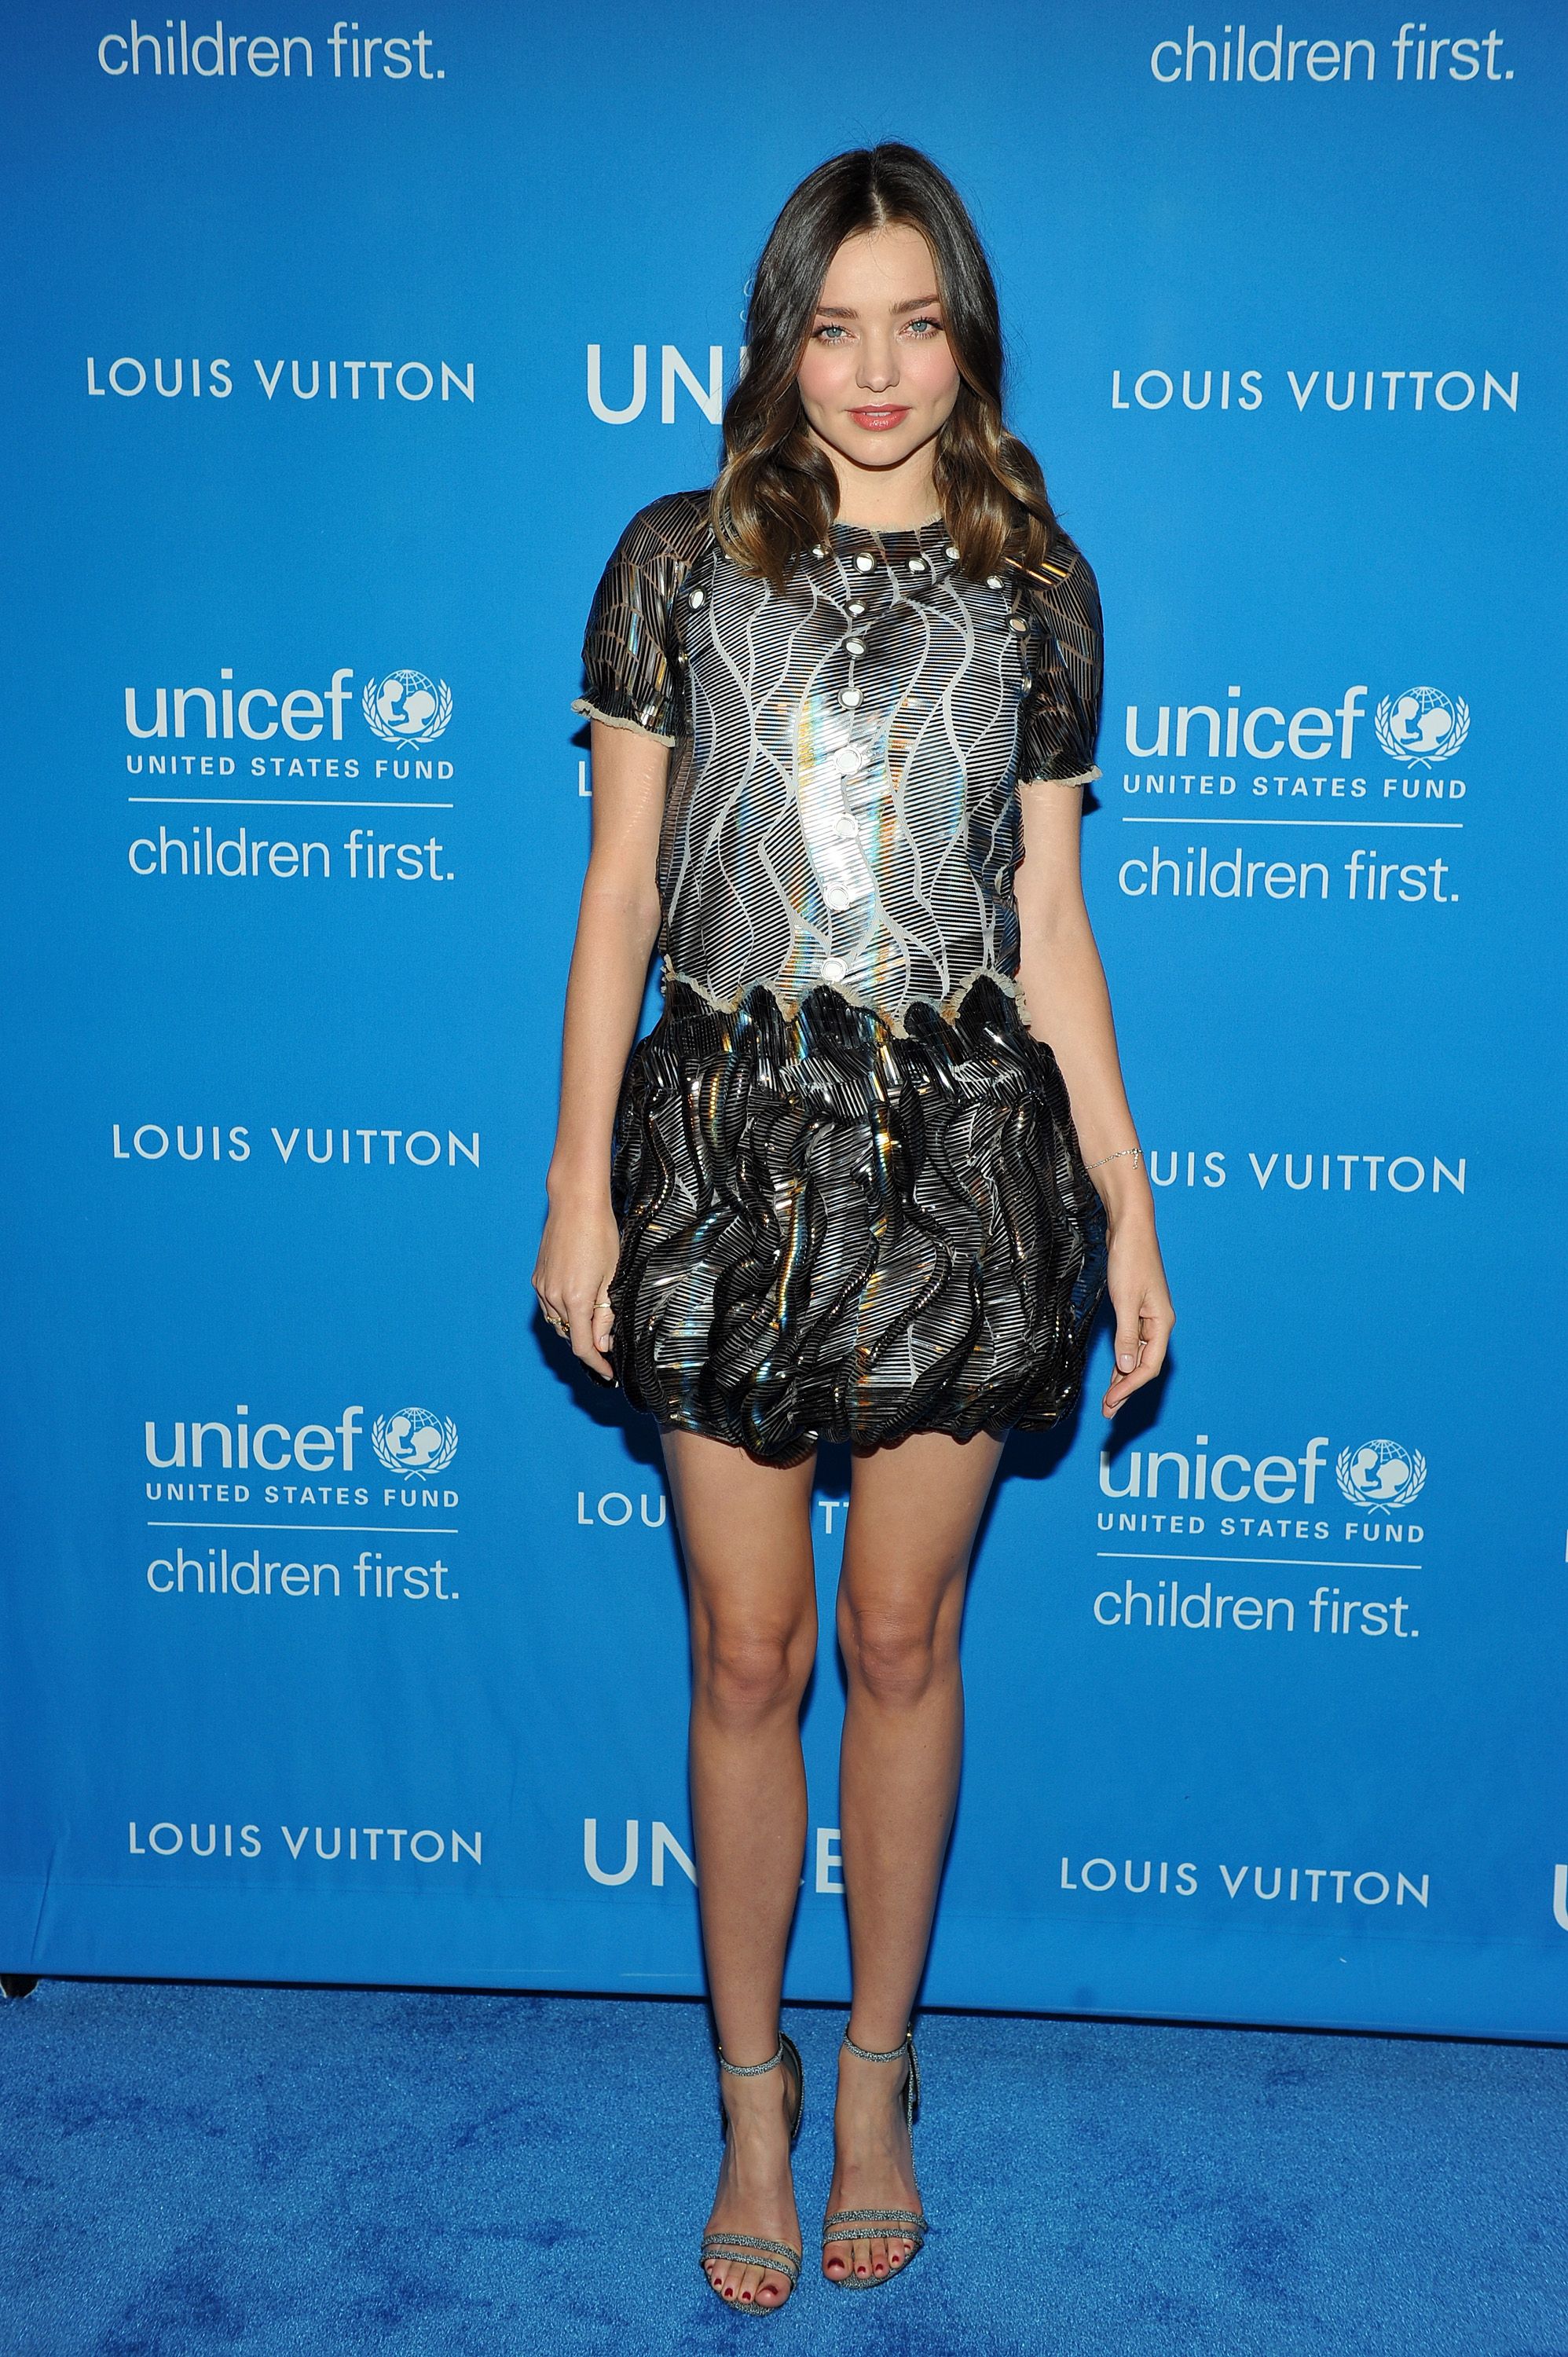 Celebrities Make a Promise at the Louis Vuitton UNICEF Ball